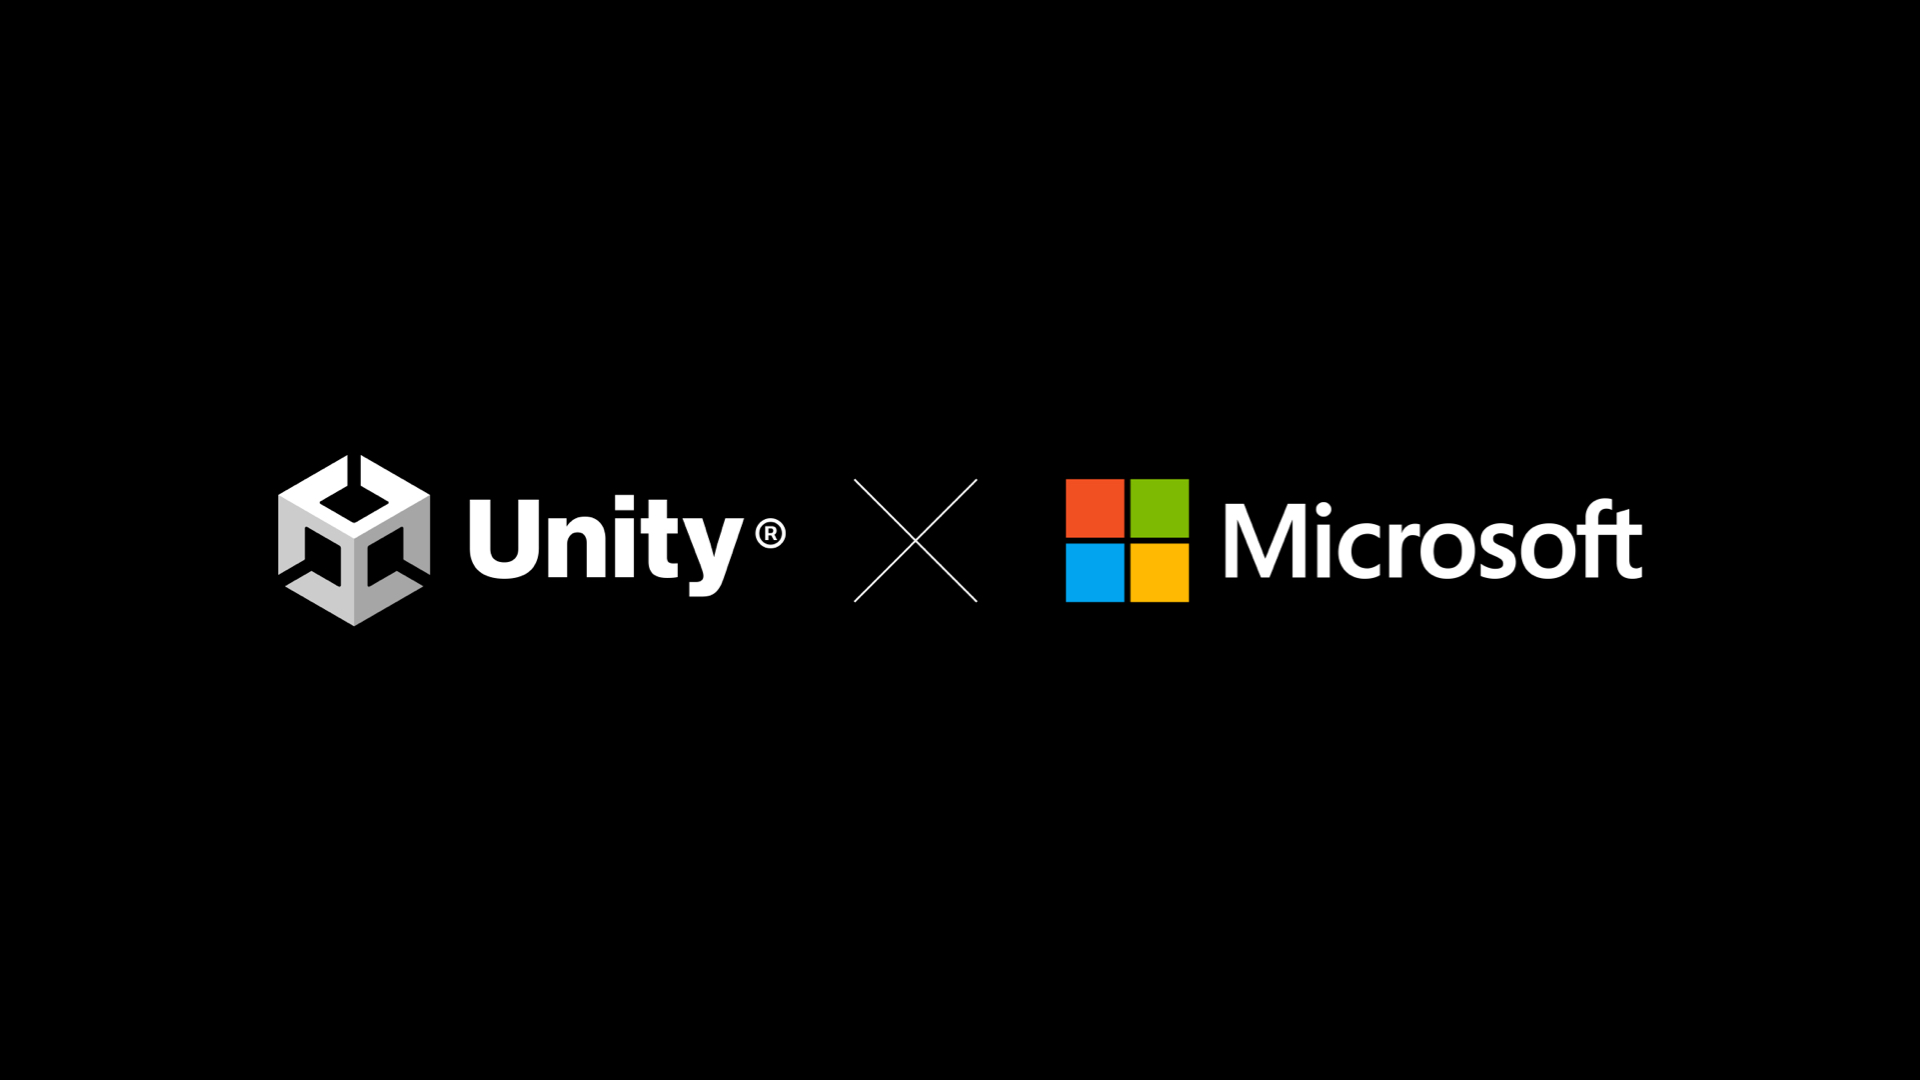 Image featuring Unity and Microsoft logos.